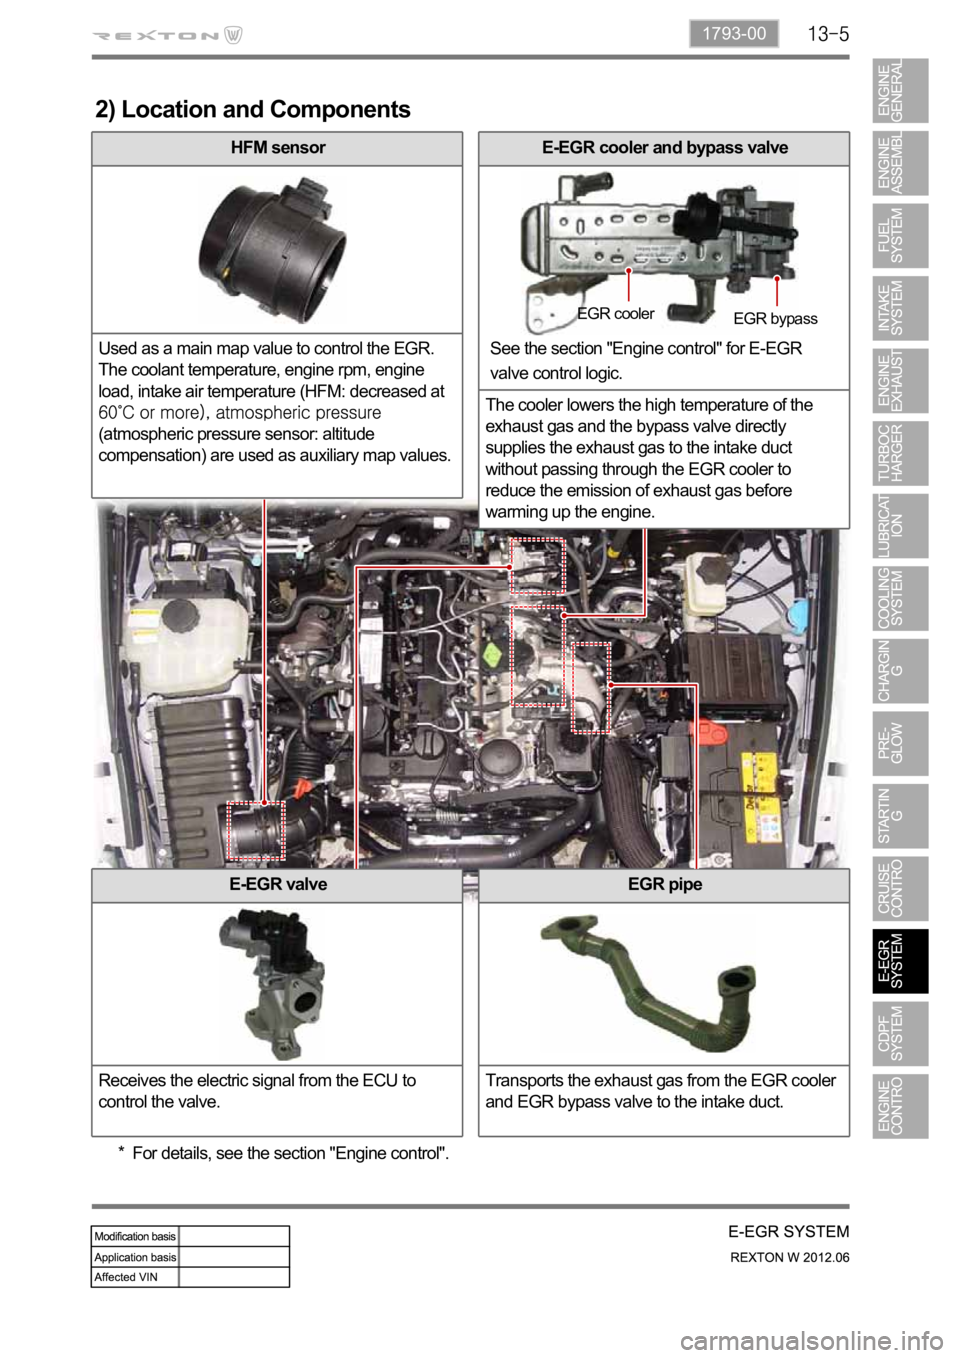 SSANGYONG NEW REXTON 2012  Service Manual 1793-00
E-EGR valve
Receives the electric signal from the ECU to 
control the valve.
E-EGR cooler and bypass valve
The cooler lowers the high temperature of the 
exhaust gas and the bypass valve direc